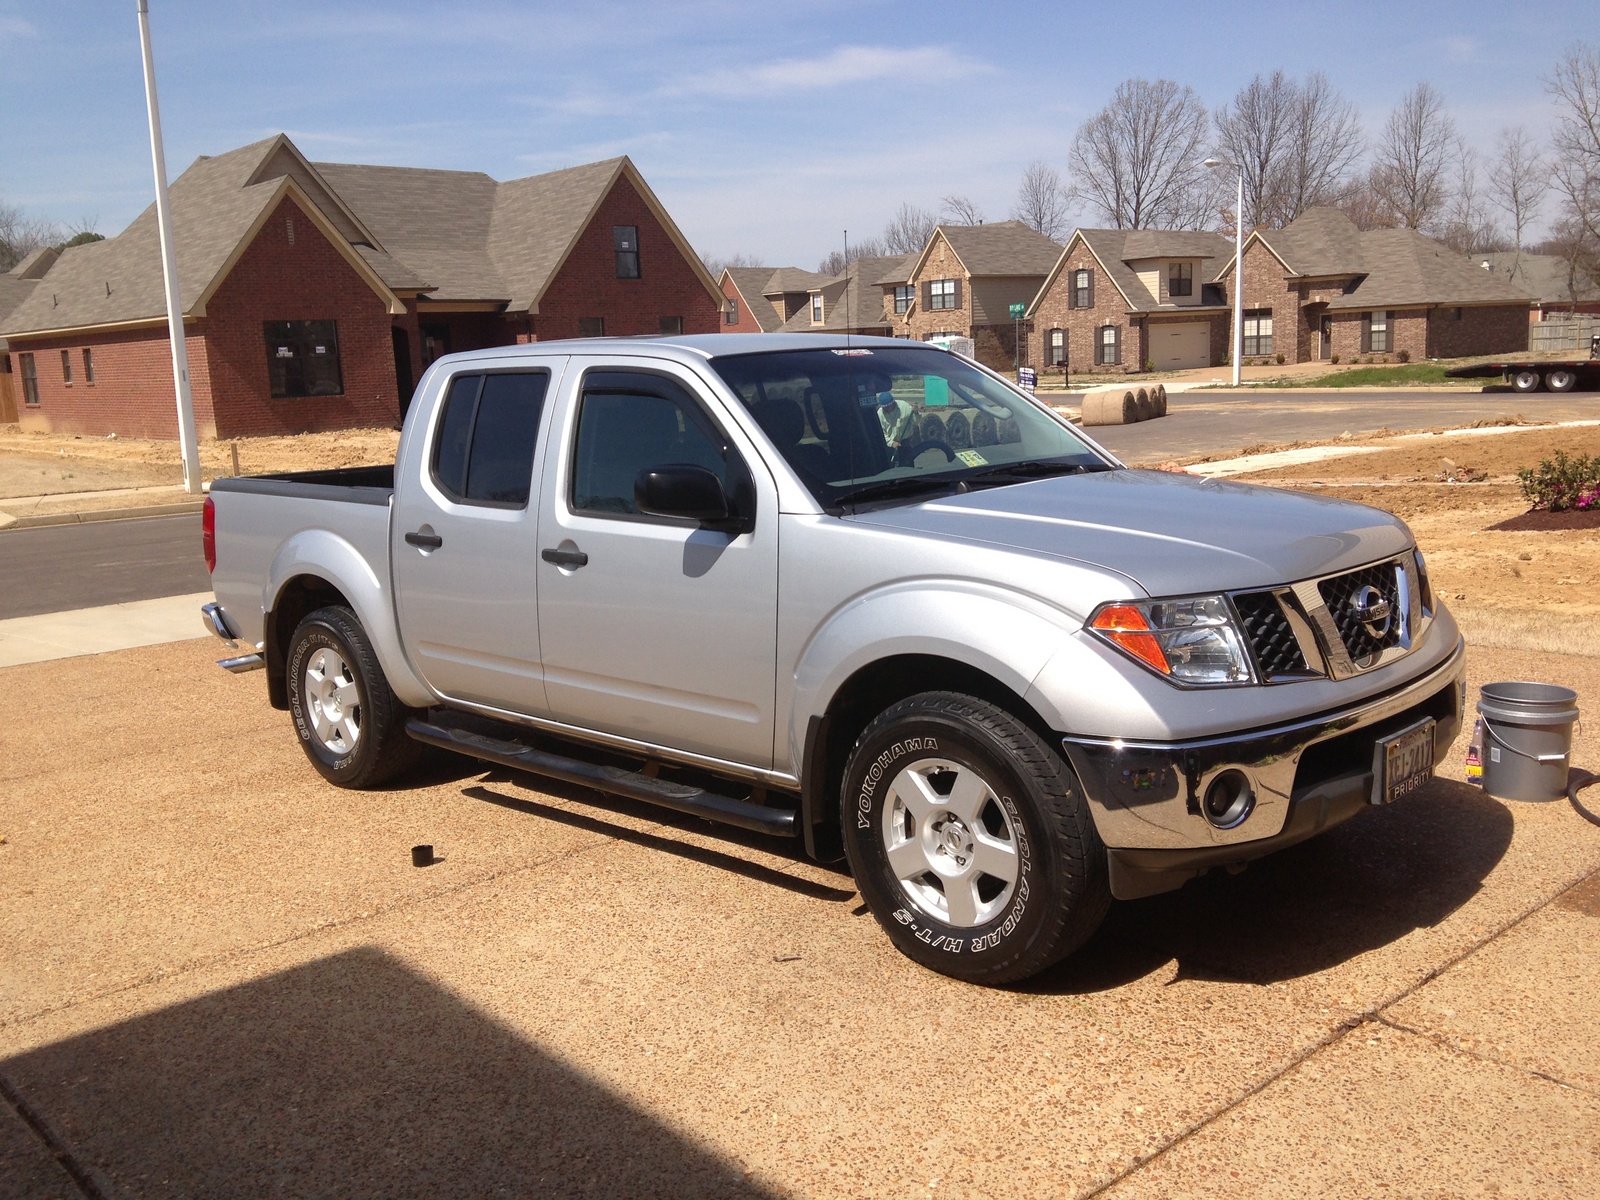 2007 Nissan frontier 4wd crew cab review #9